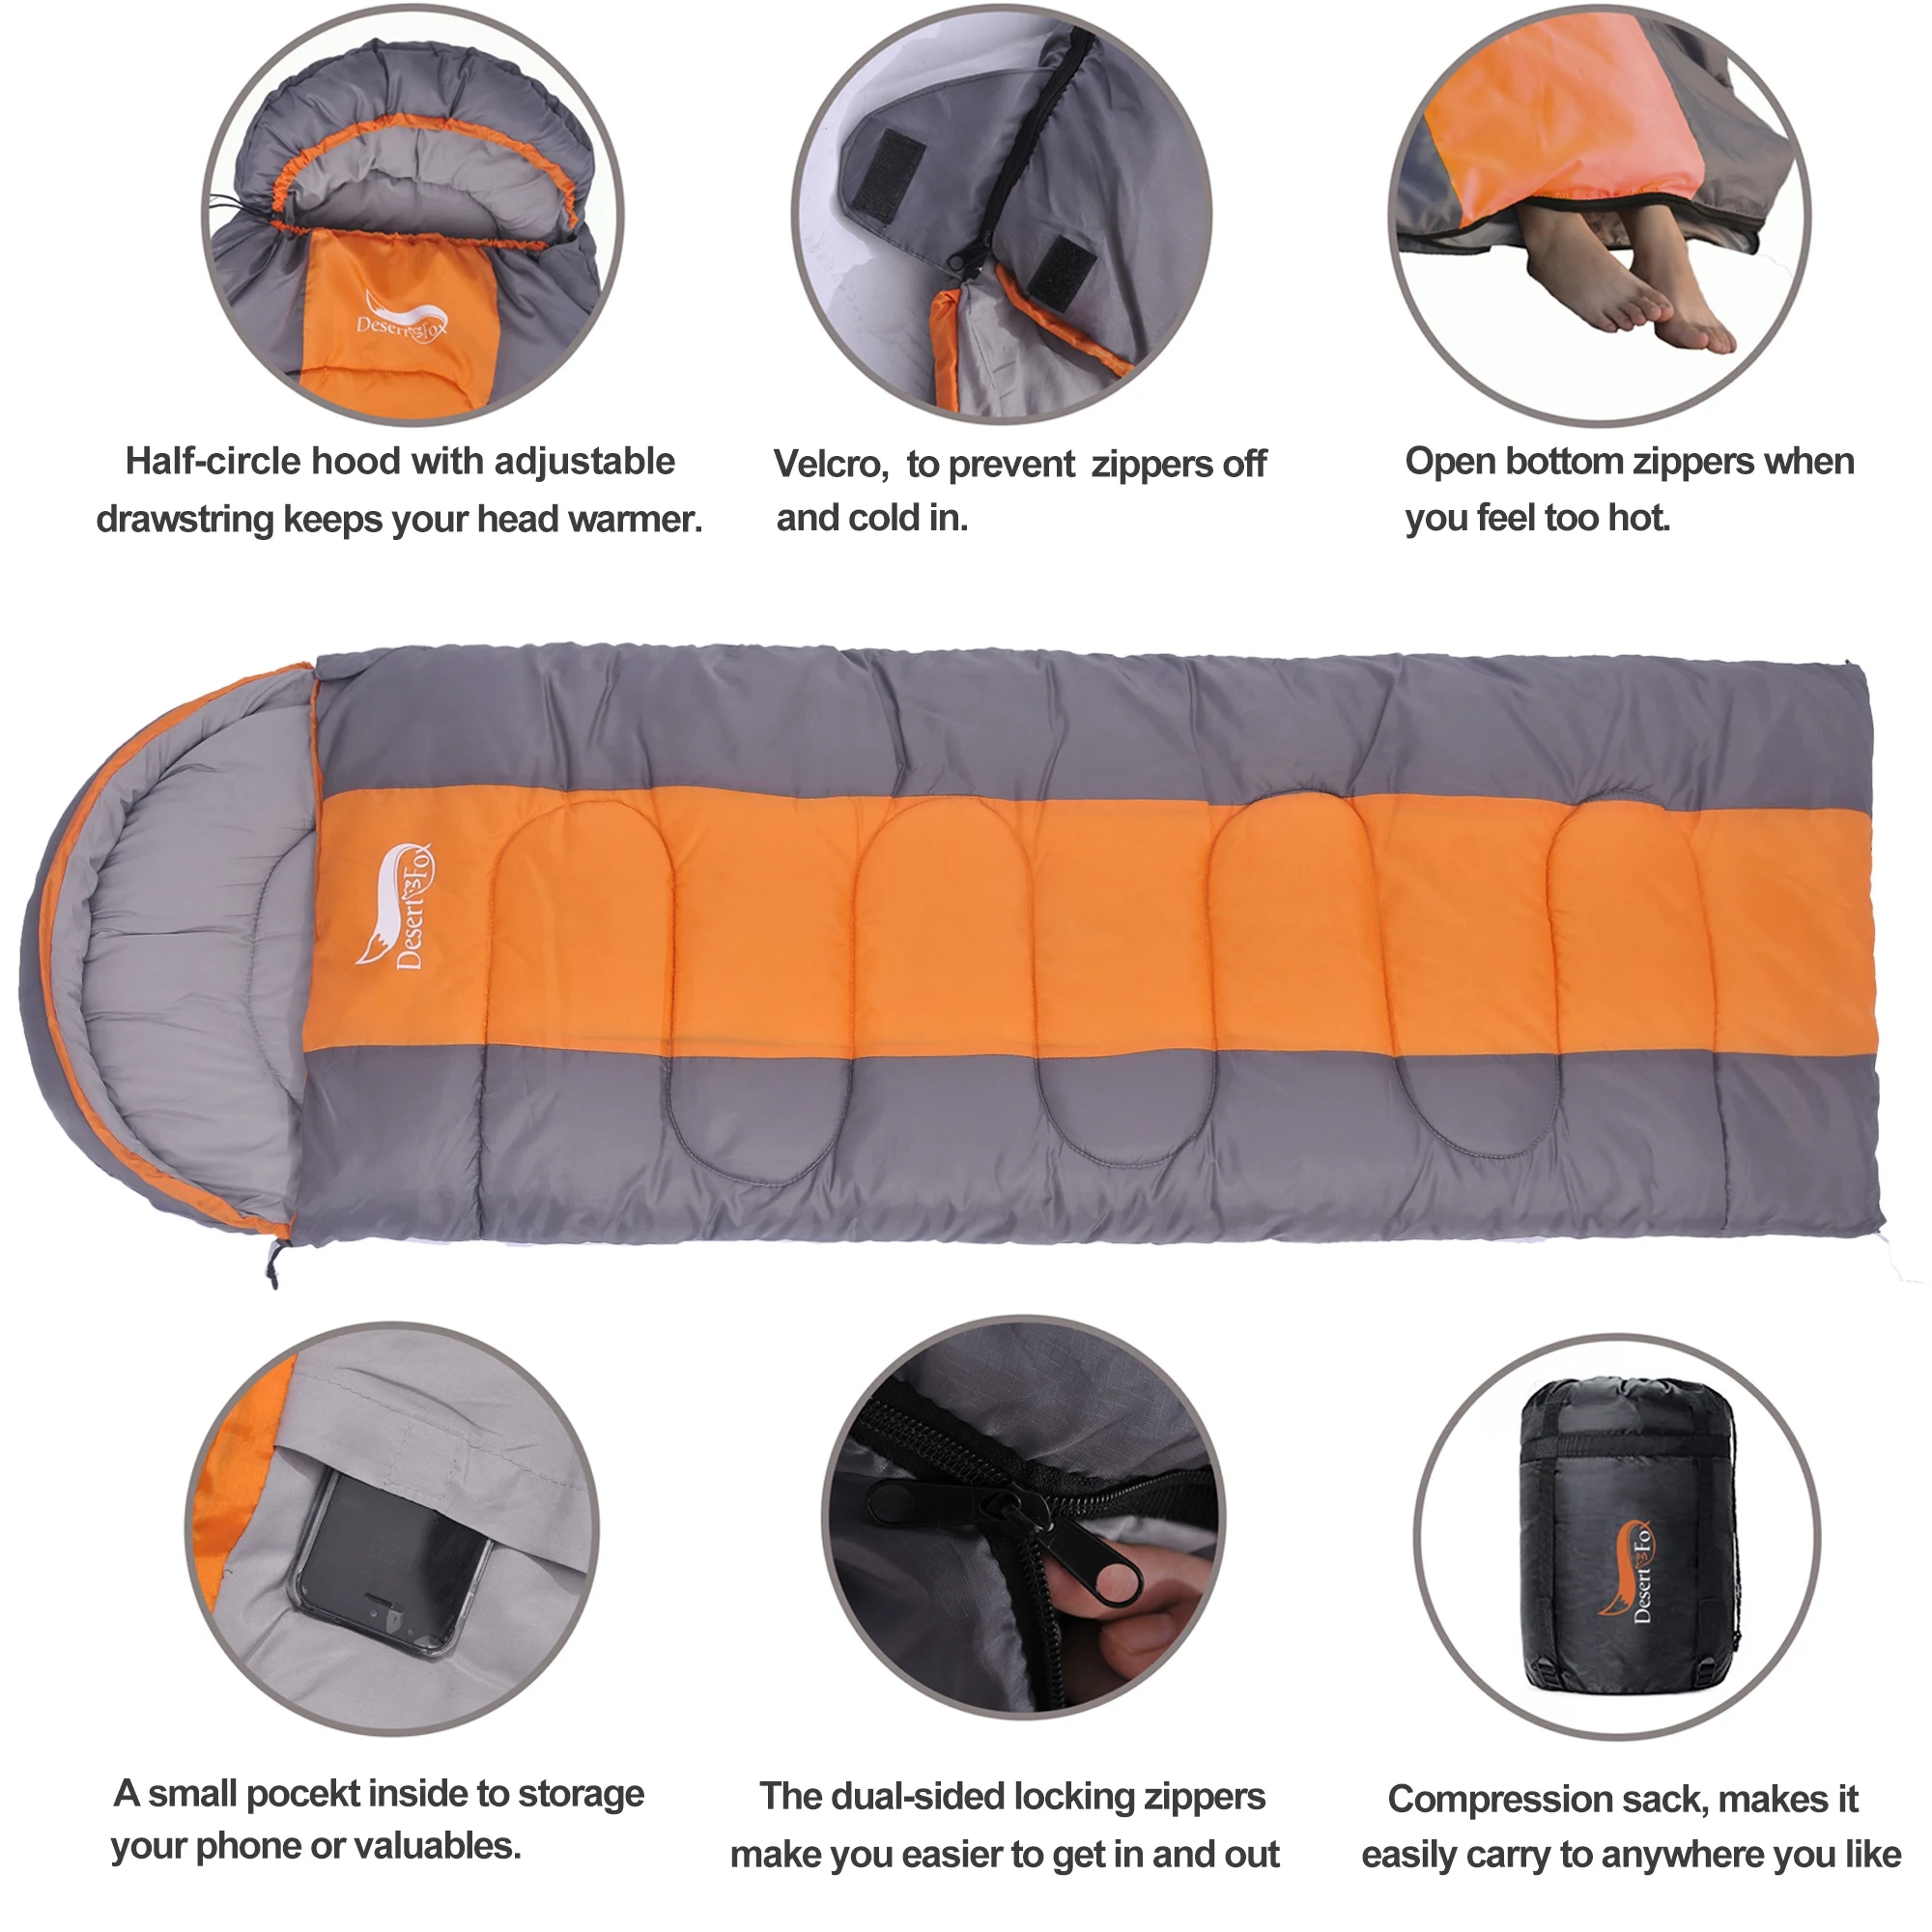 Desert&Fox Warm Sleeping Bags for Camping 4 Seasons Adult Kids Sleeping Bag Hiking Backpacking Travel with Compression Sack 3